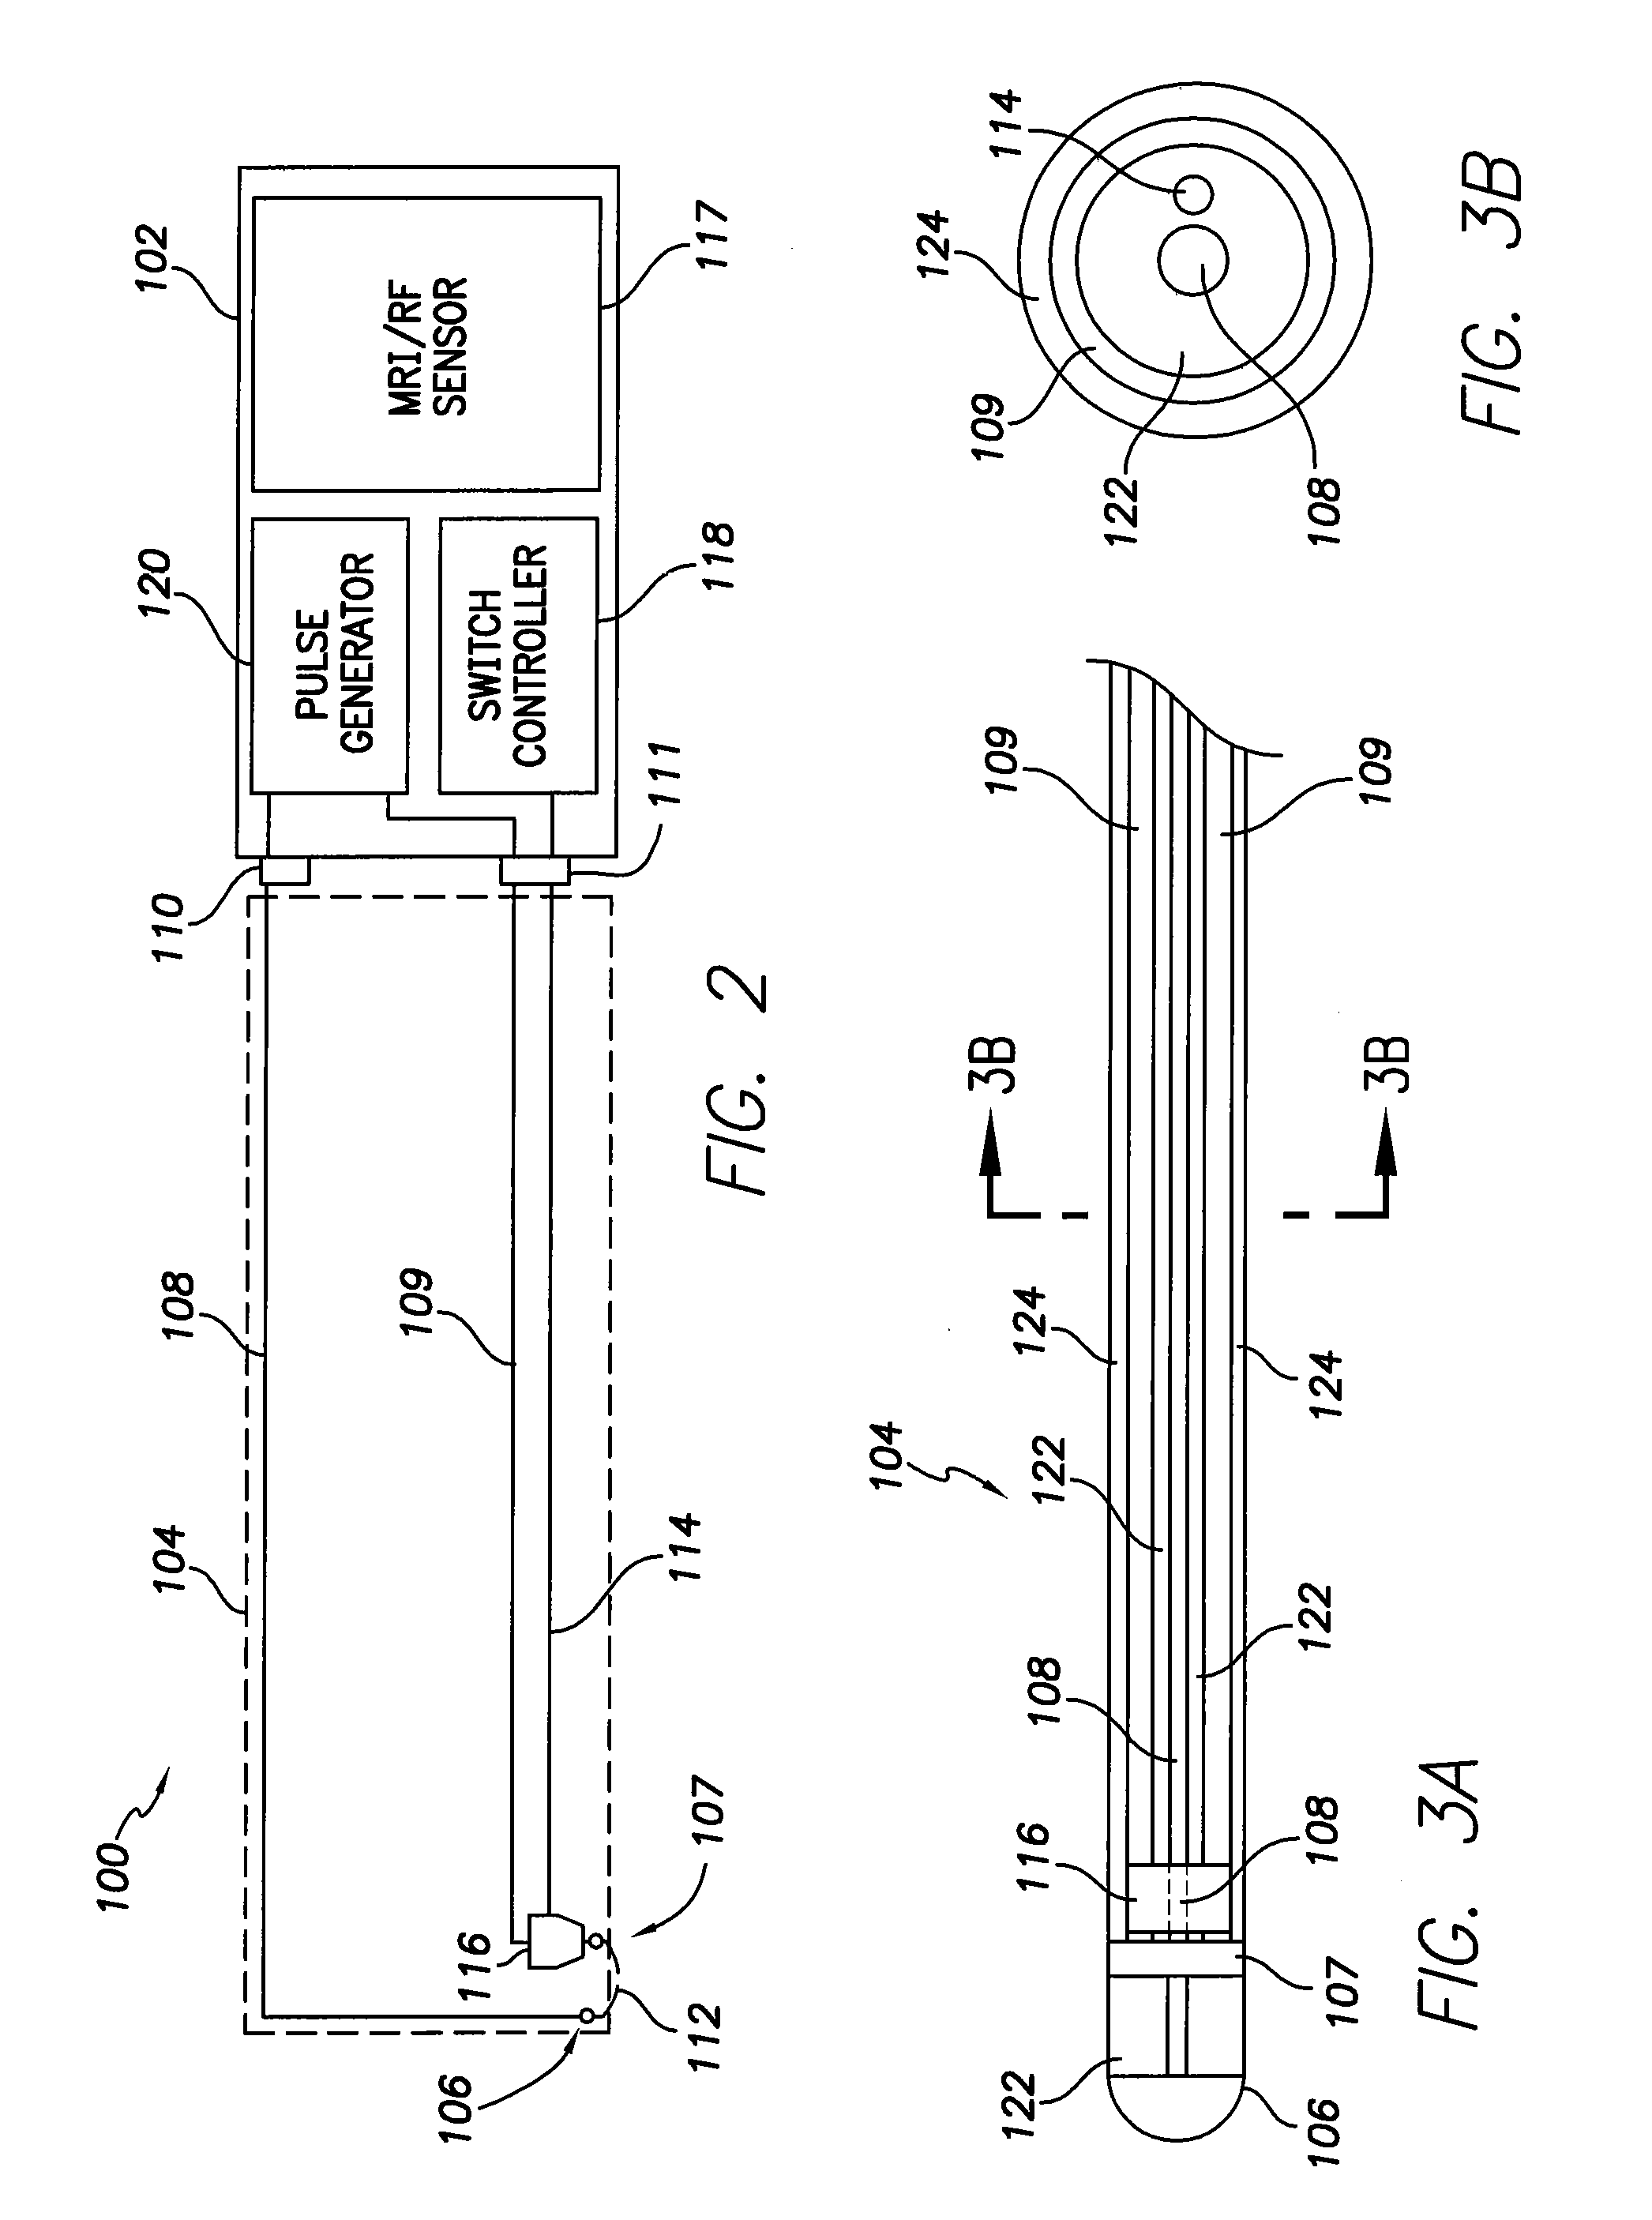 Systems and methods for exploiting the tip or ring conductor of an implantable medical device lead during an MRI to reduce lead heating and the risks of MRI-induced stimulation